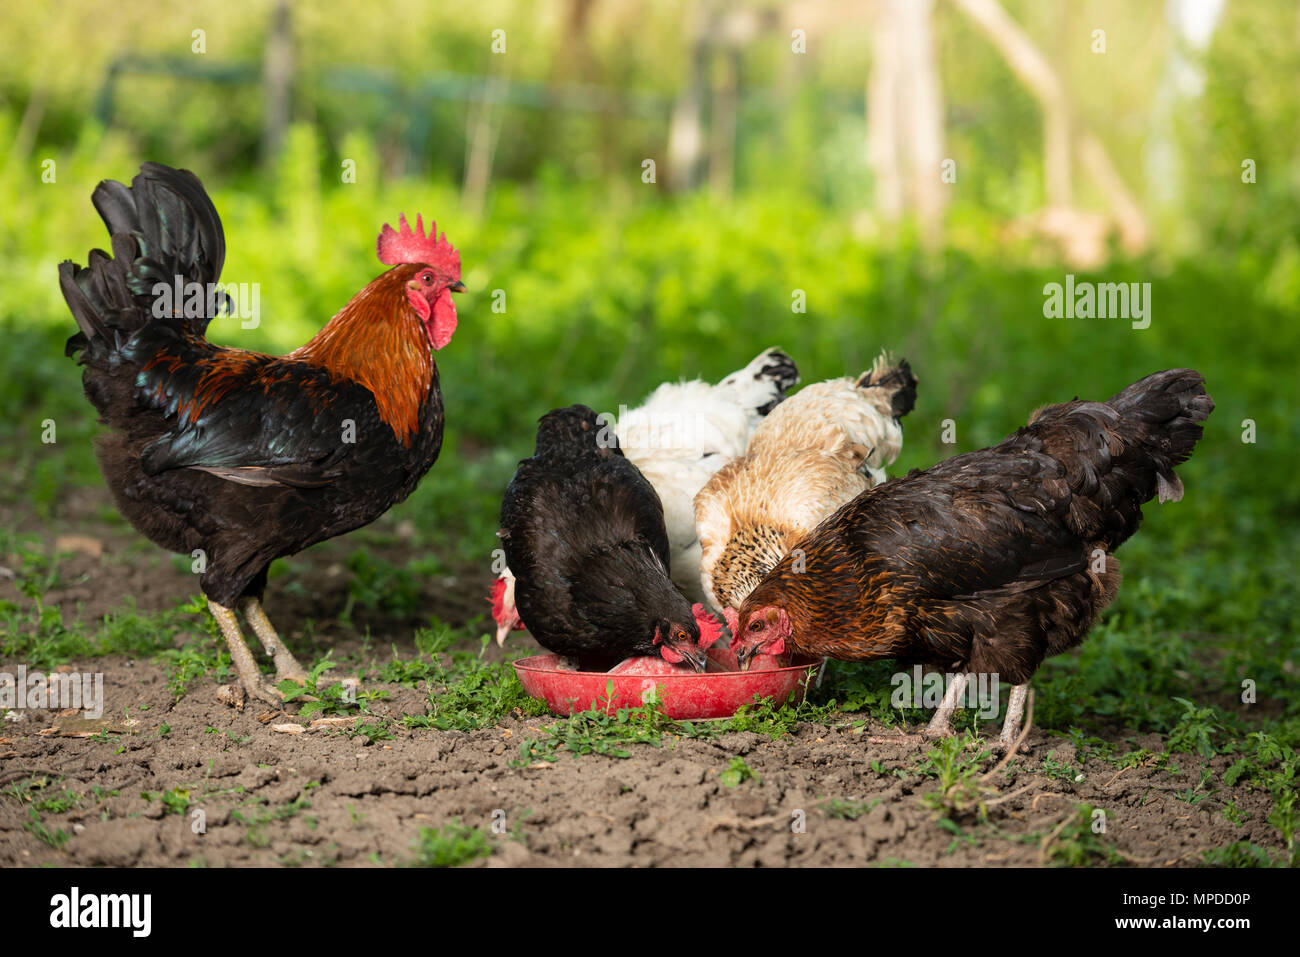 Roots and chickens in natural environment Stock Photo